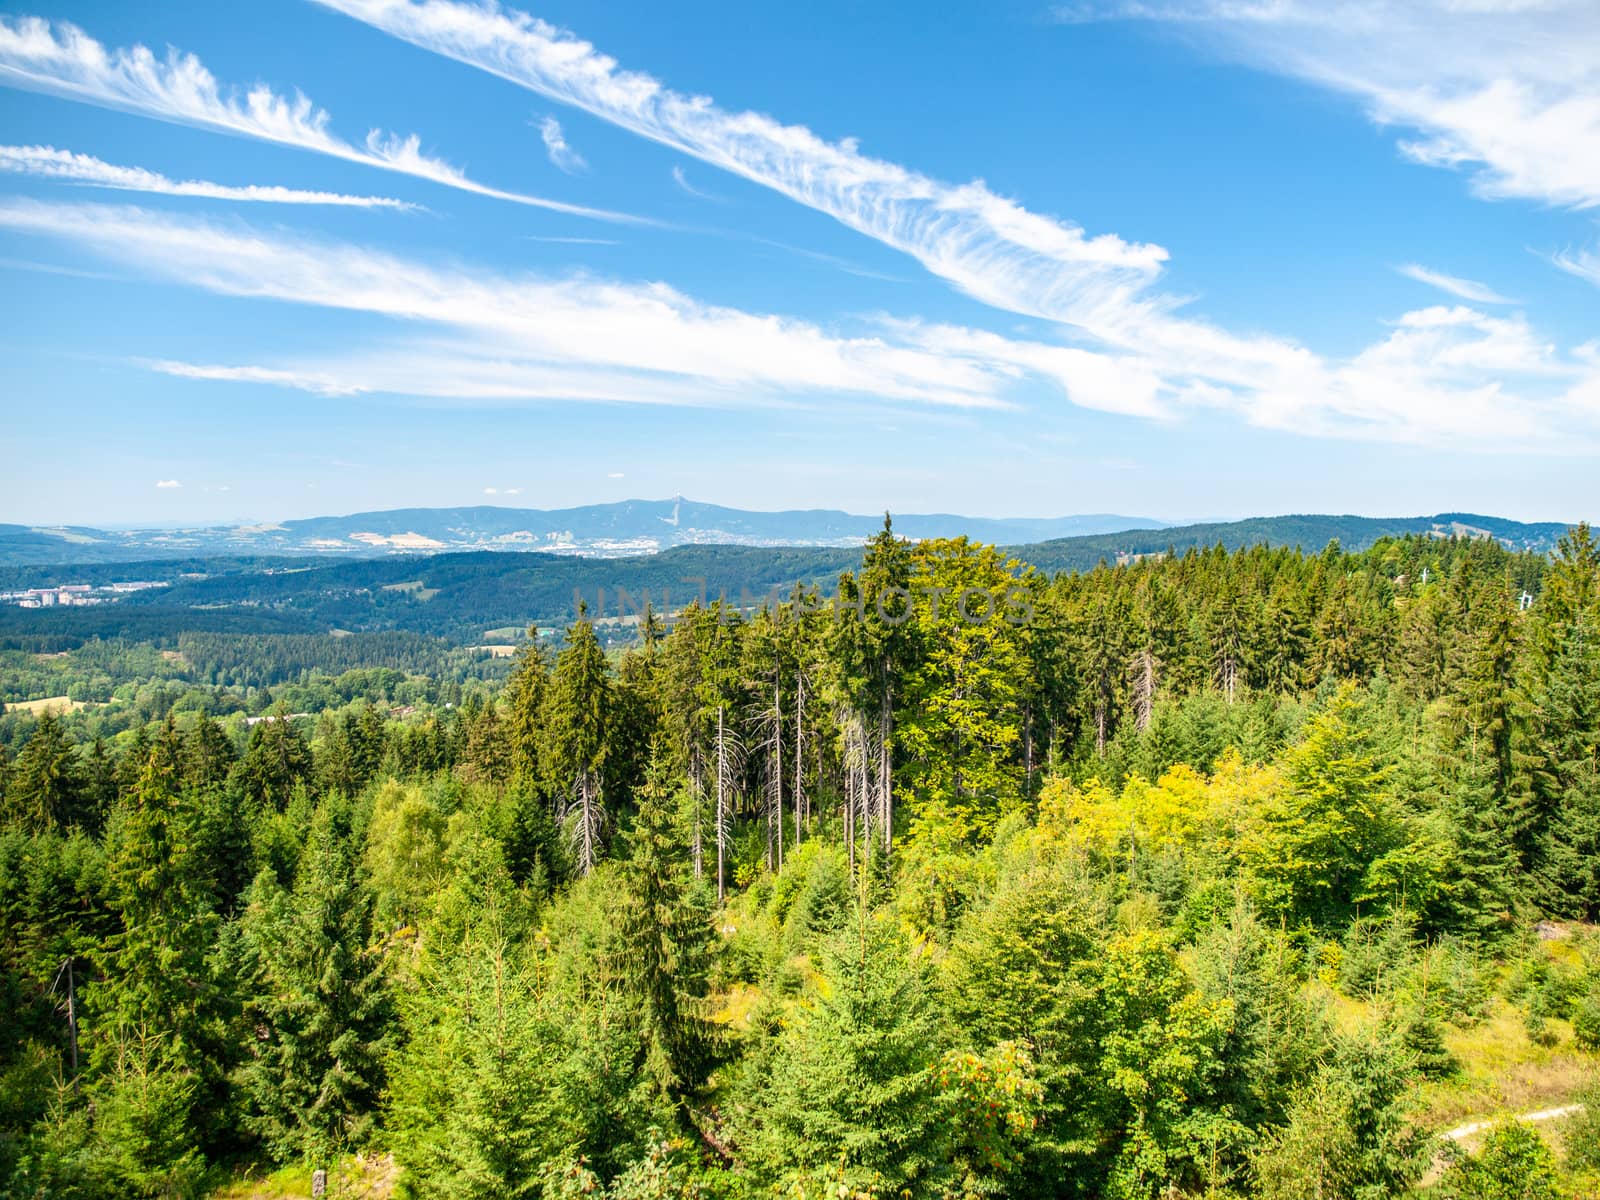 Green forest landscape of Jizera Mountains with Liberec and Jested Mounain on the background, Czech Republic. View from Slovanka lookout tower.